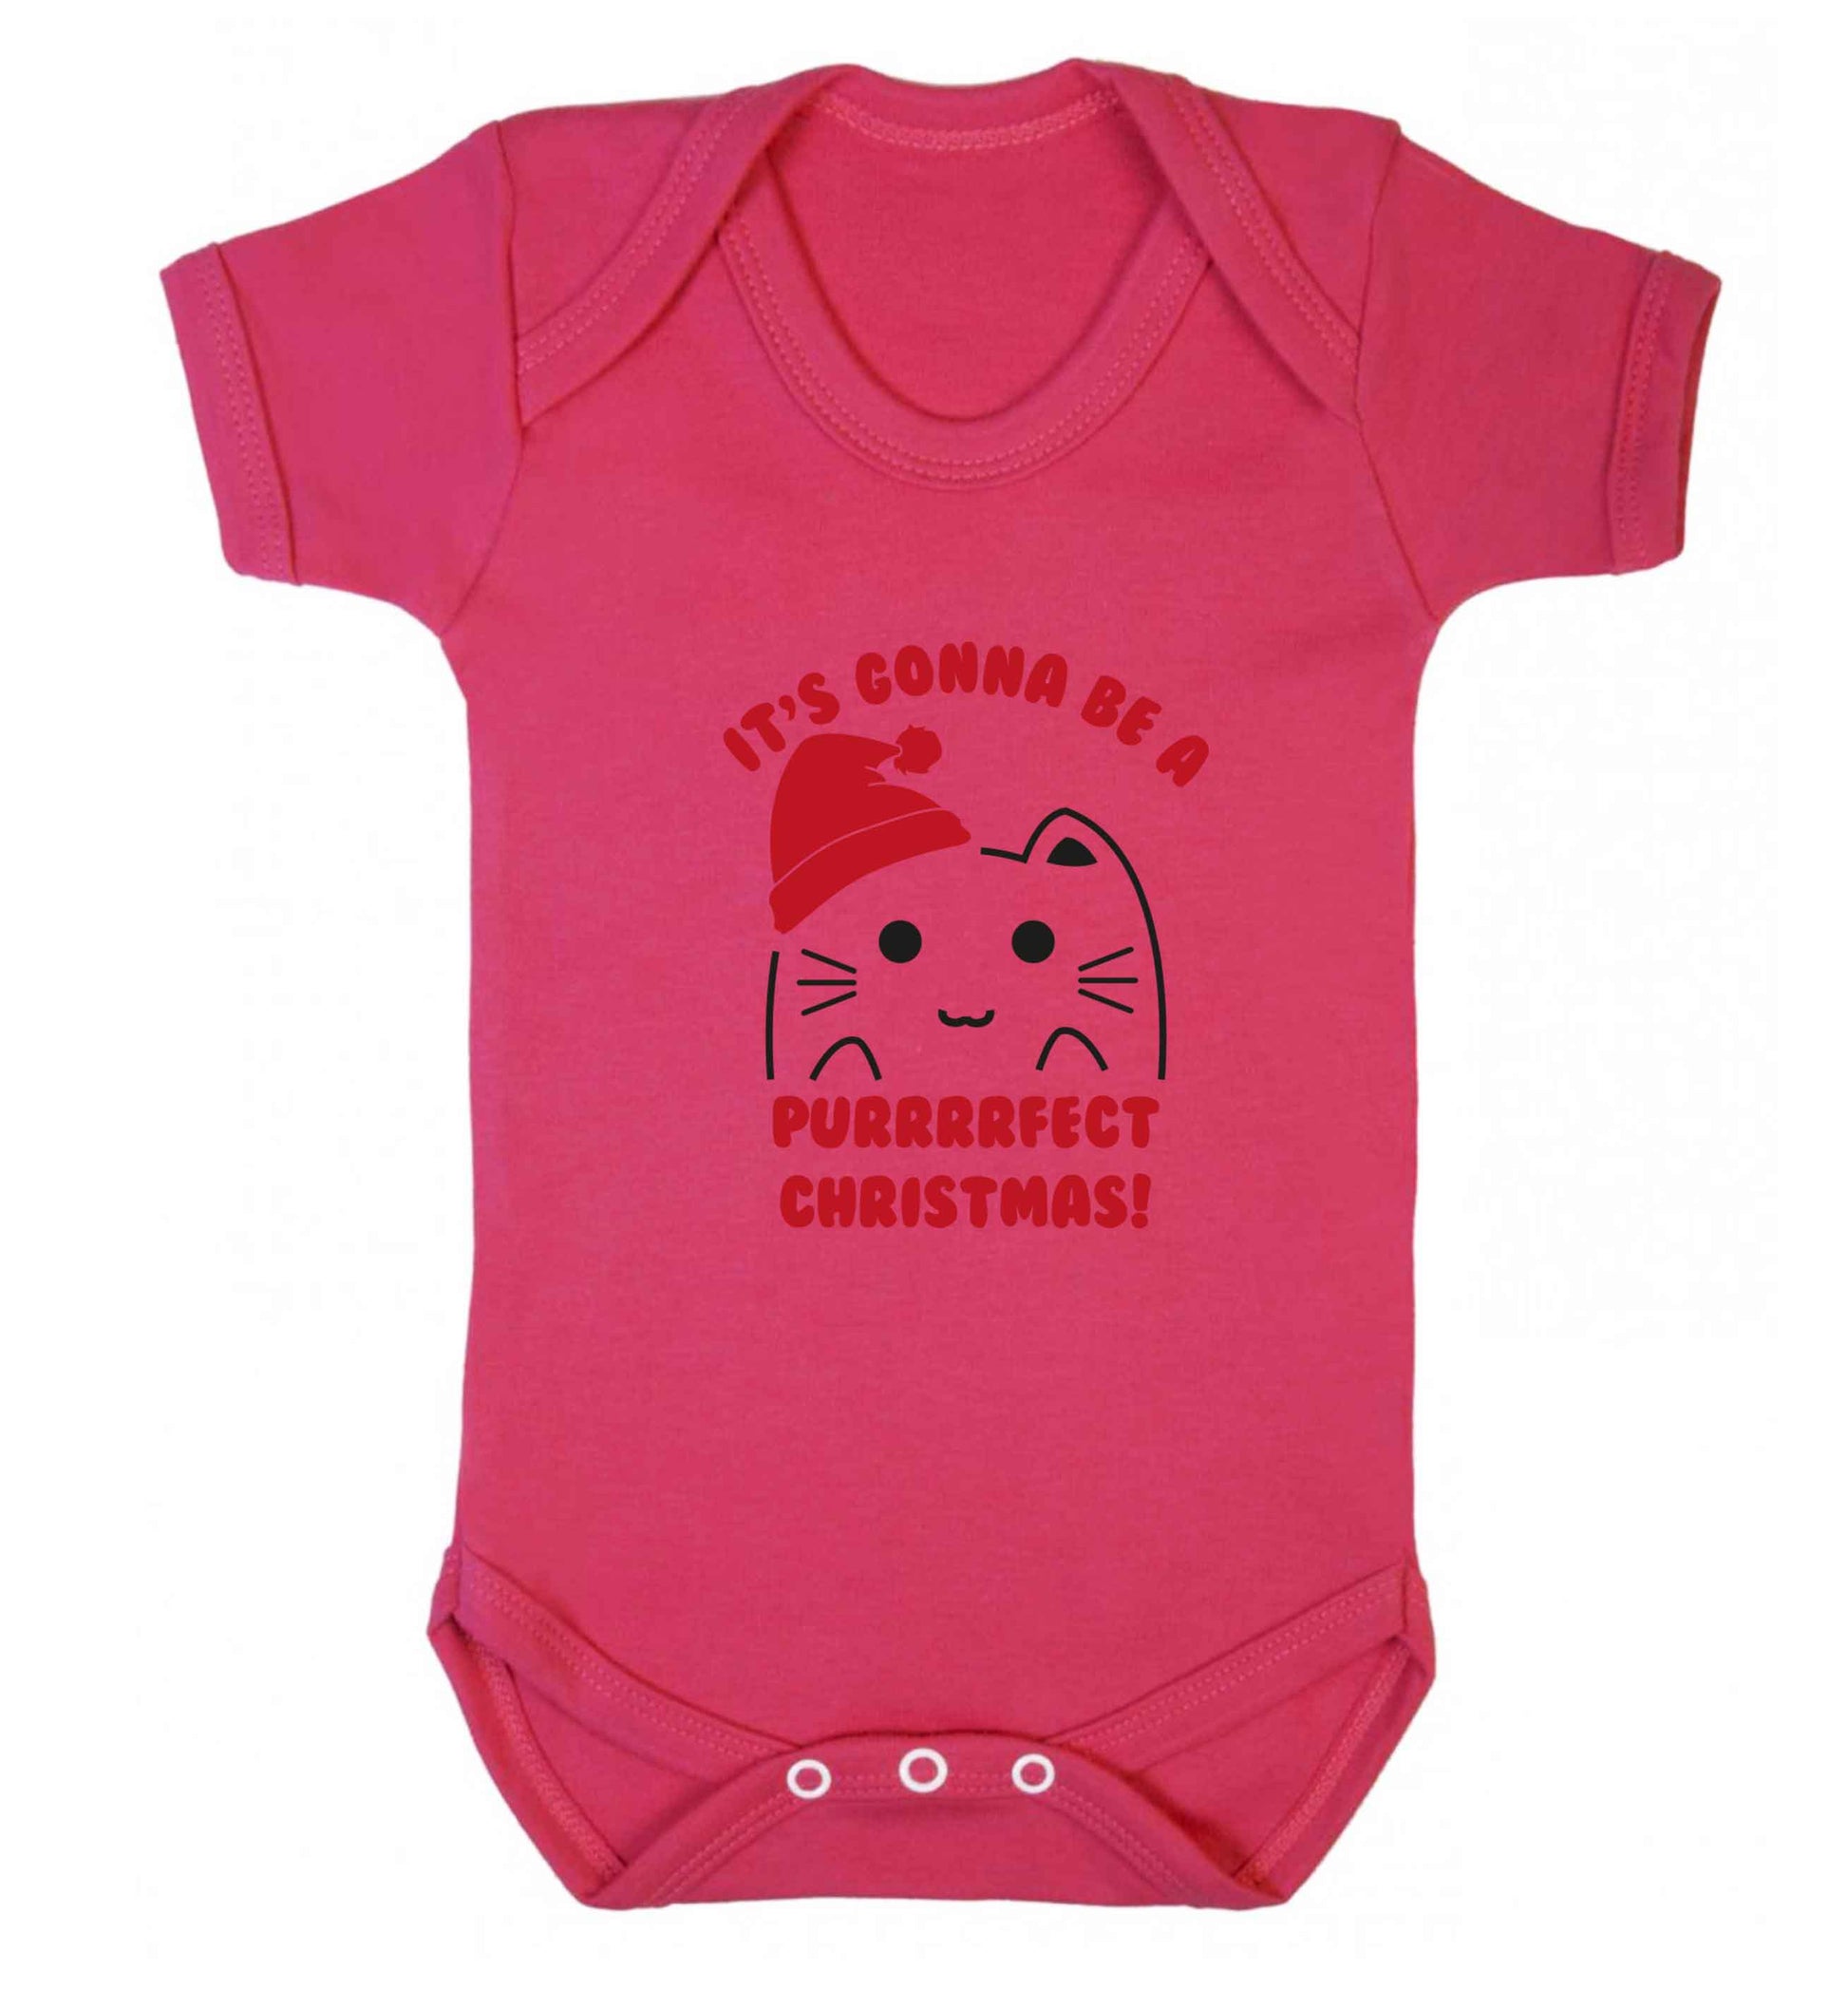 It's going to be a purrfect Christmas baby vest dark pink 18-24 months